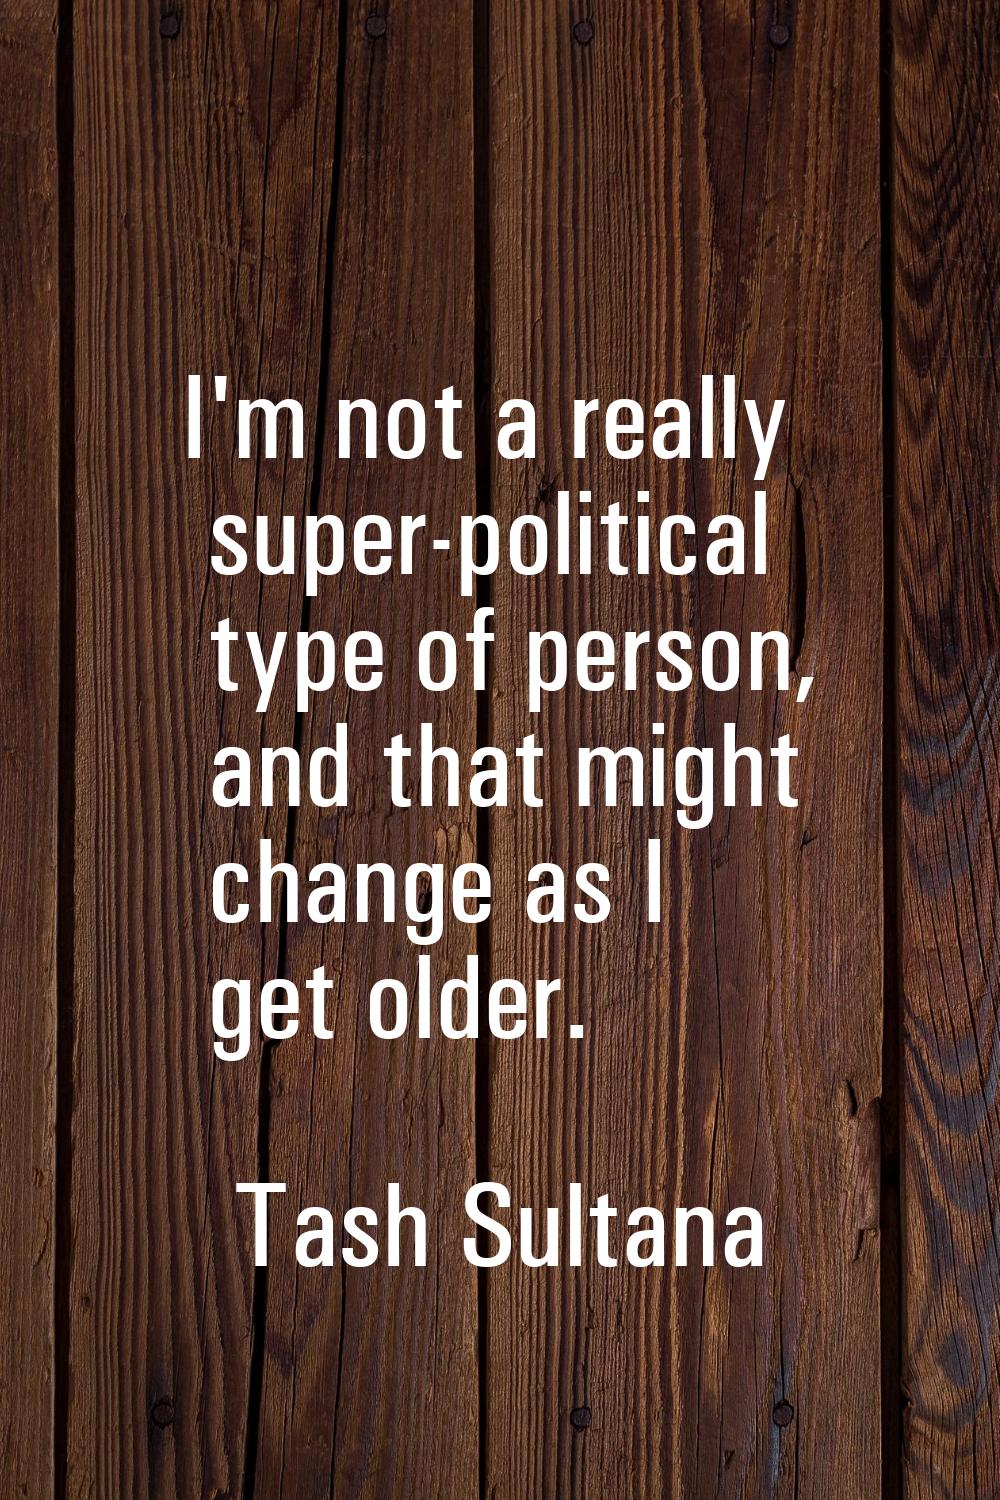 I'm not a really super-political type of person, and that might change as I get older.